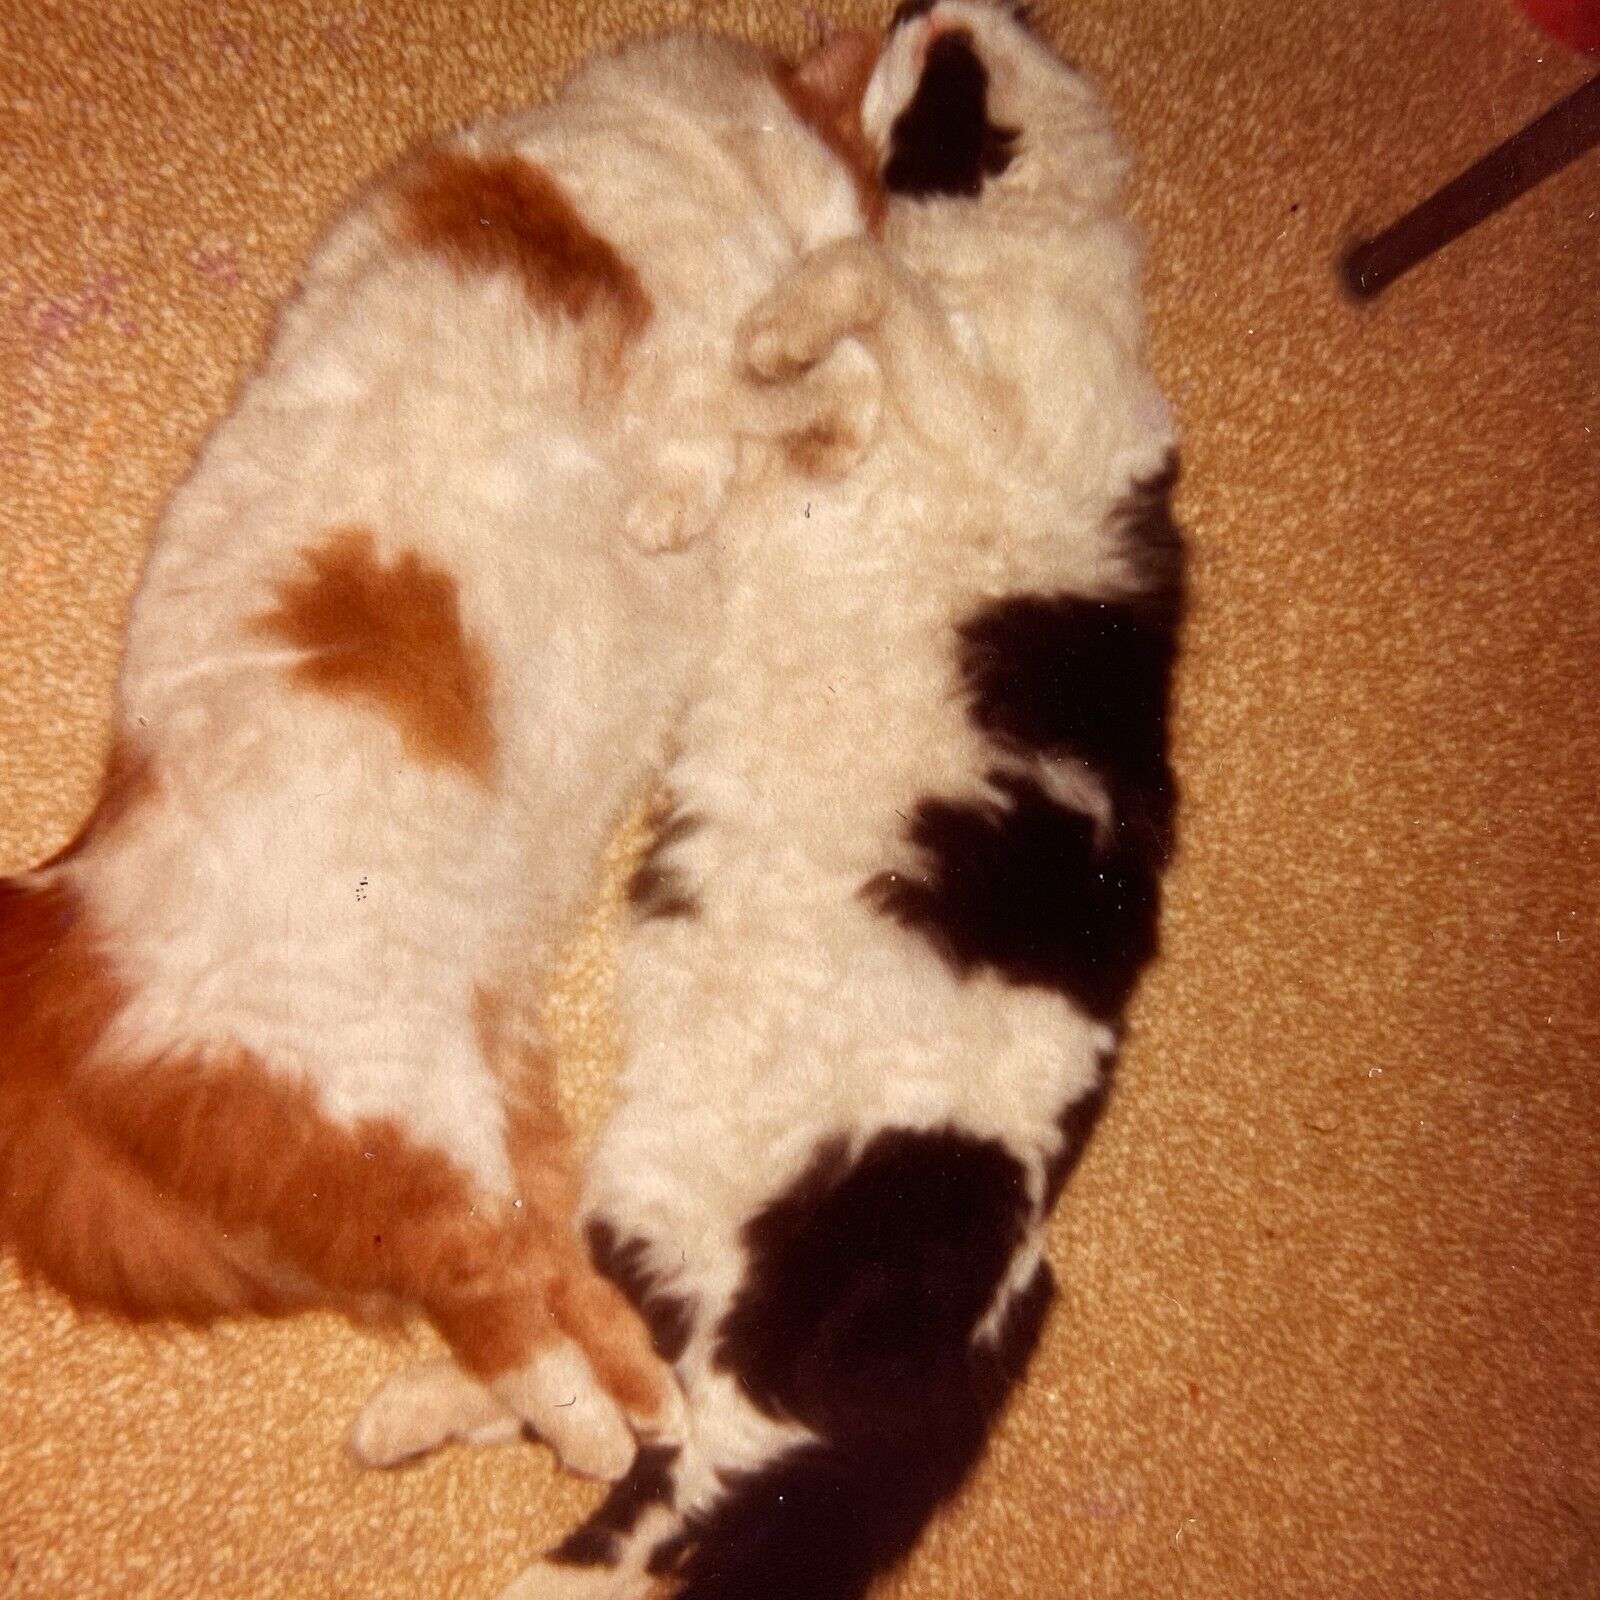 JC Photograph Two Cute Big Fat Cats Cuddle Sleep Nap Play On Floor 1980\'s 1983